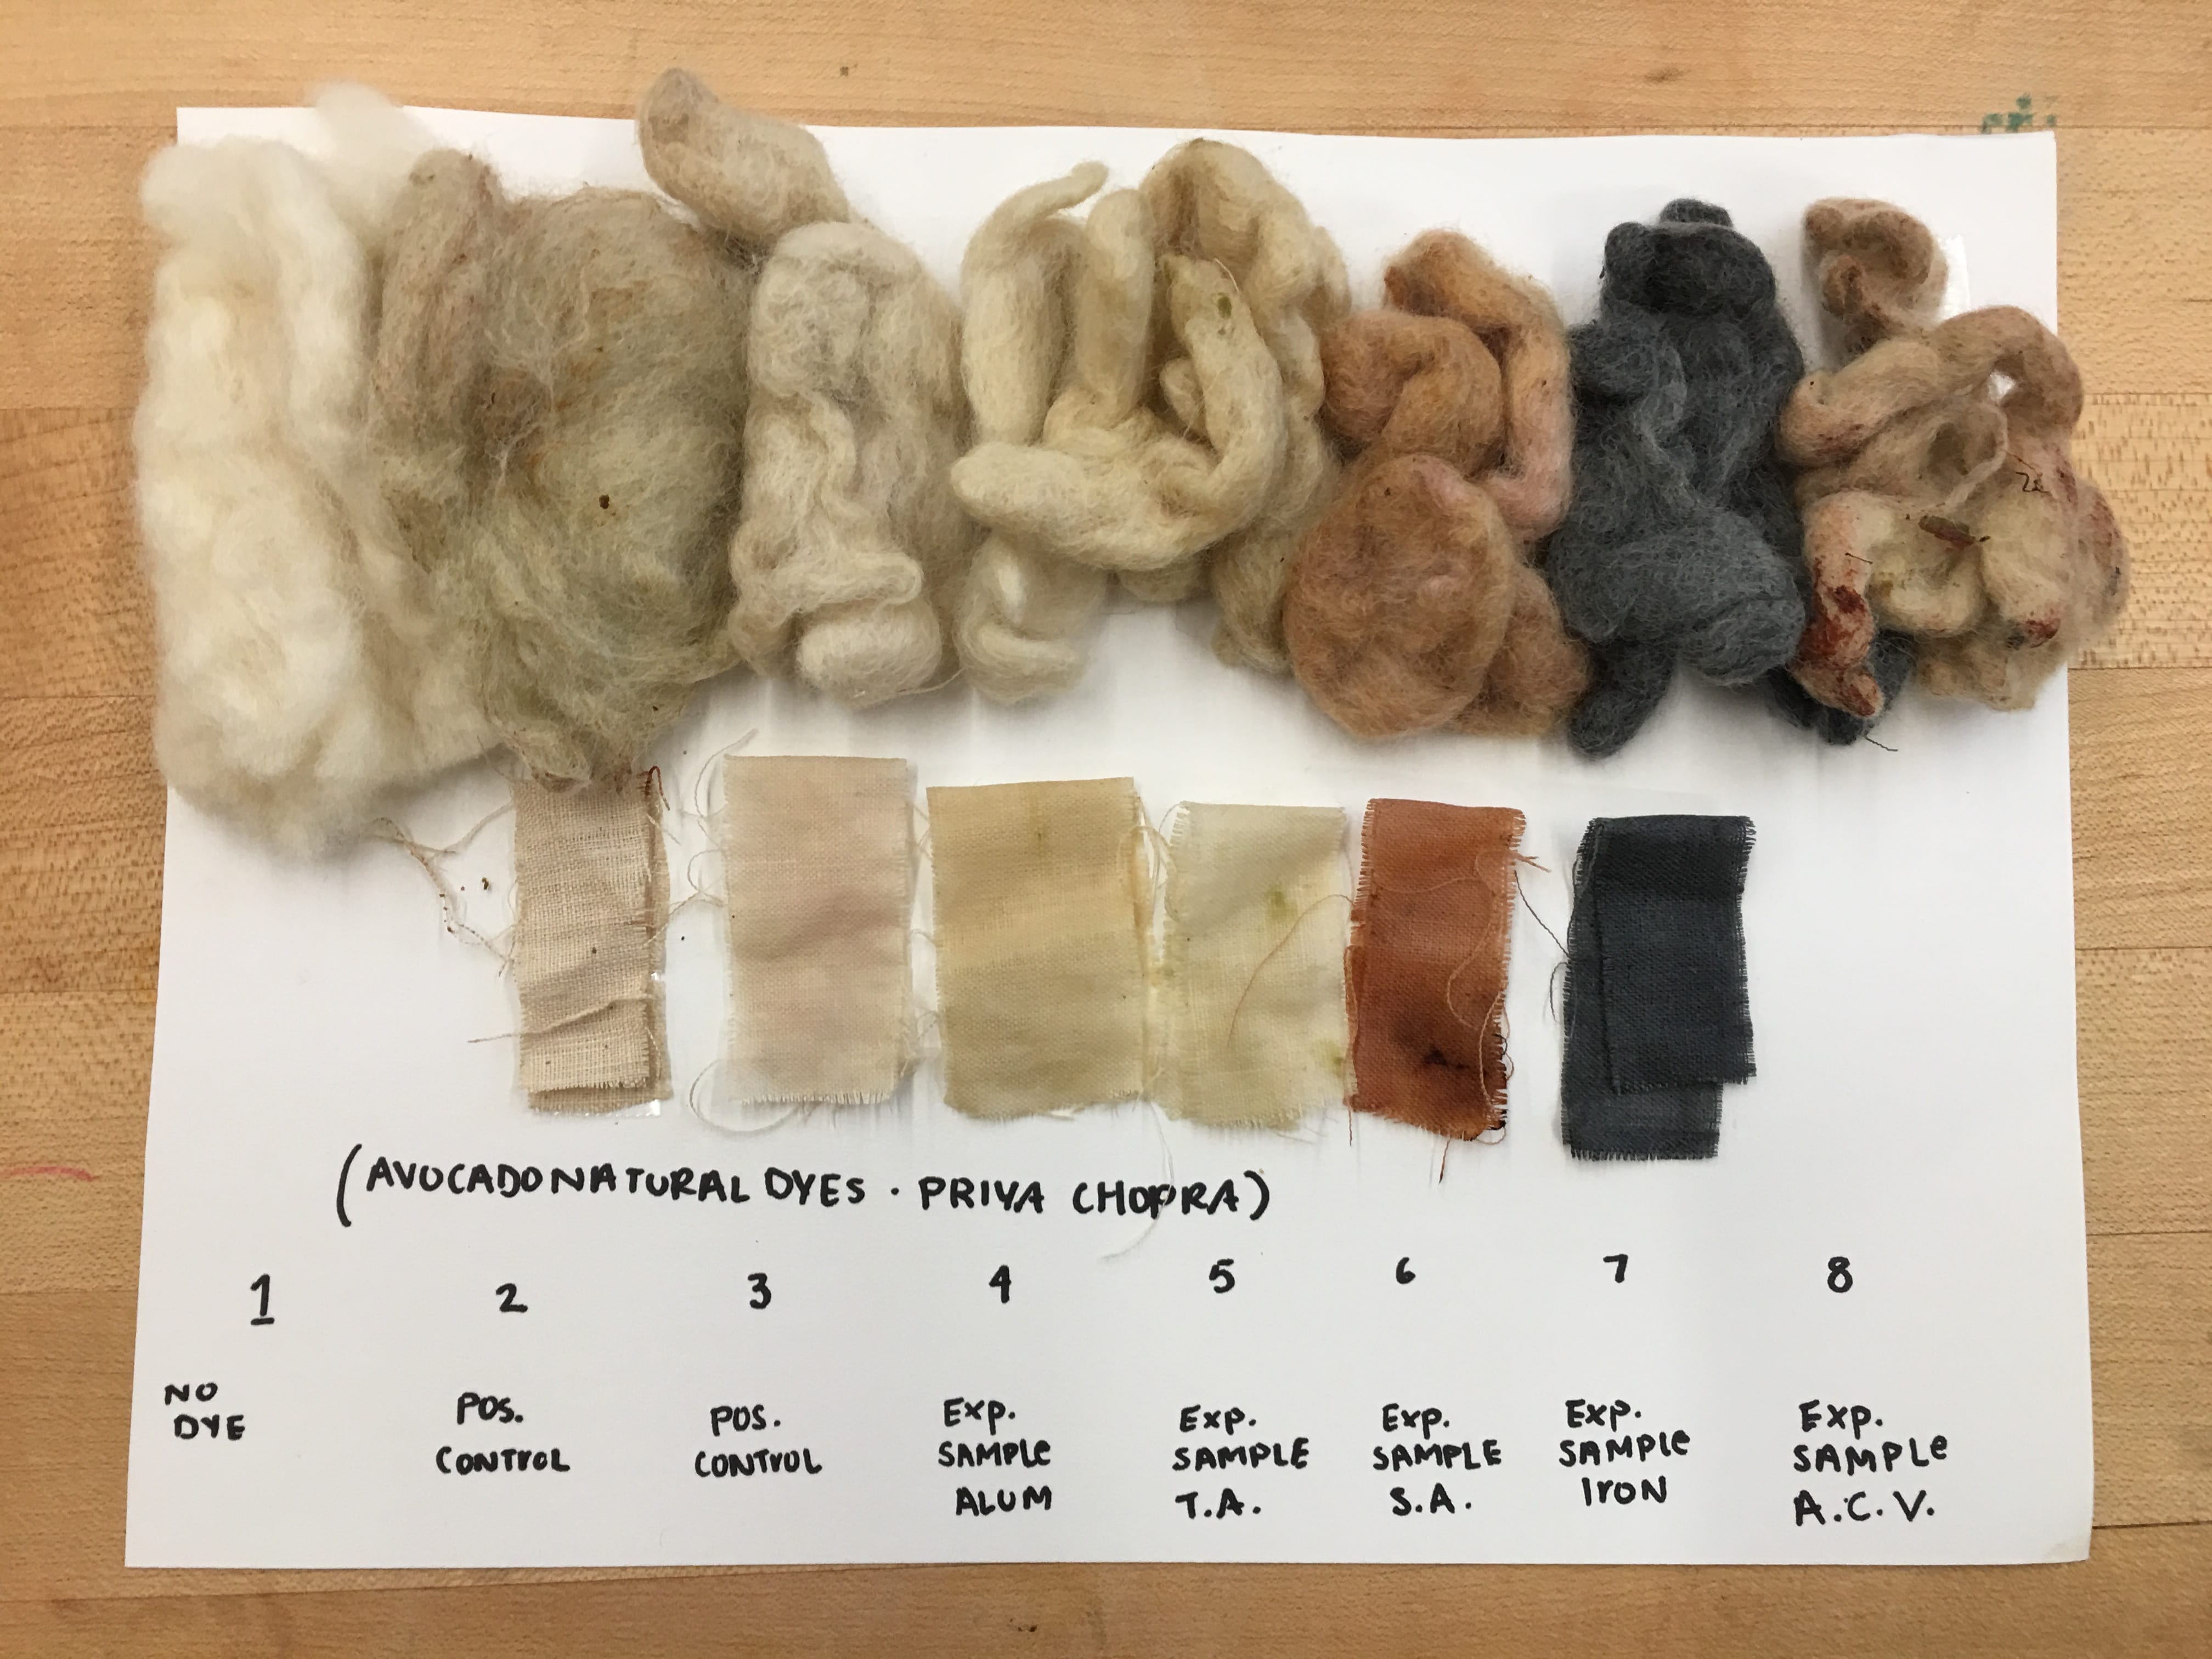 SUSTAINABLE SYSTEMS: NATURAL DYEING + SHIBORI